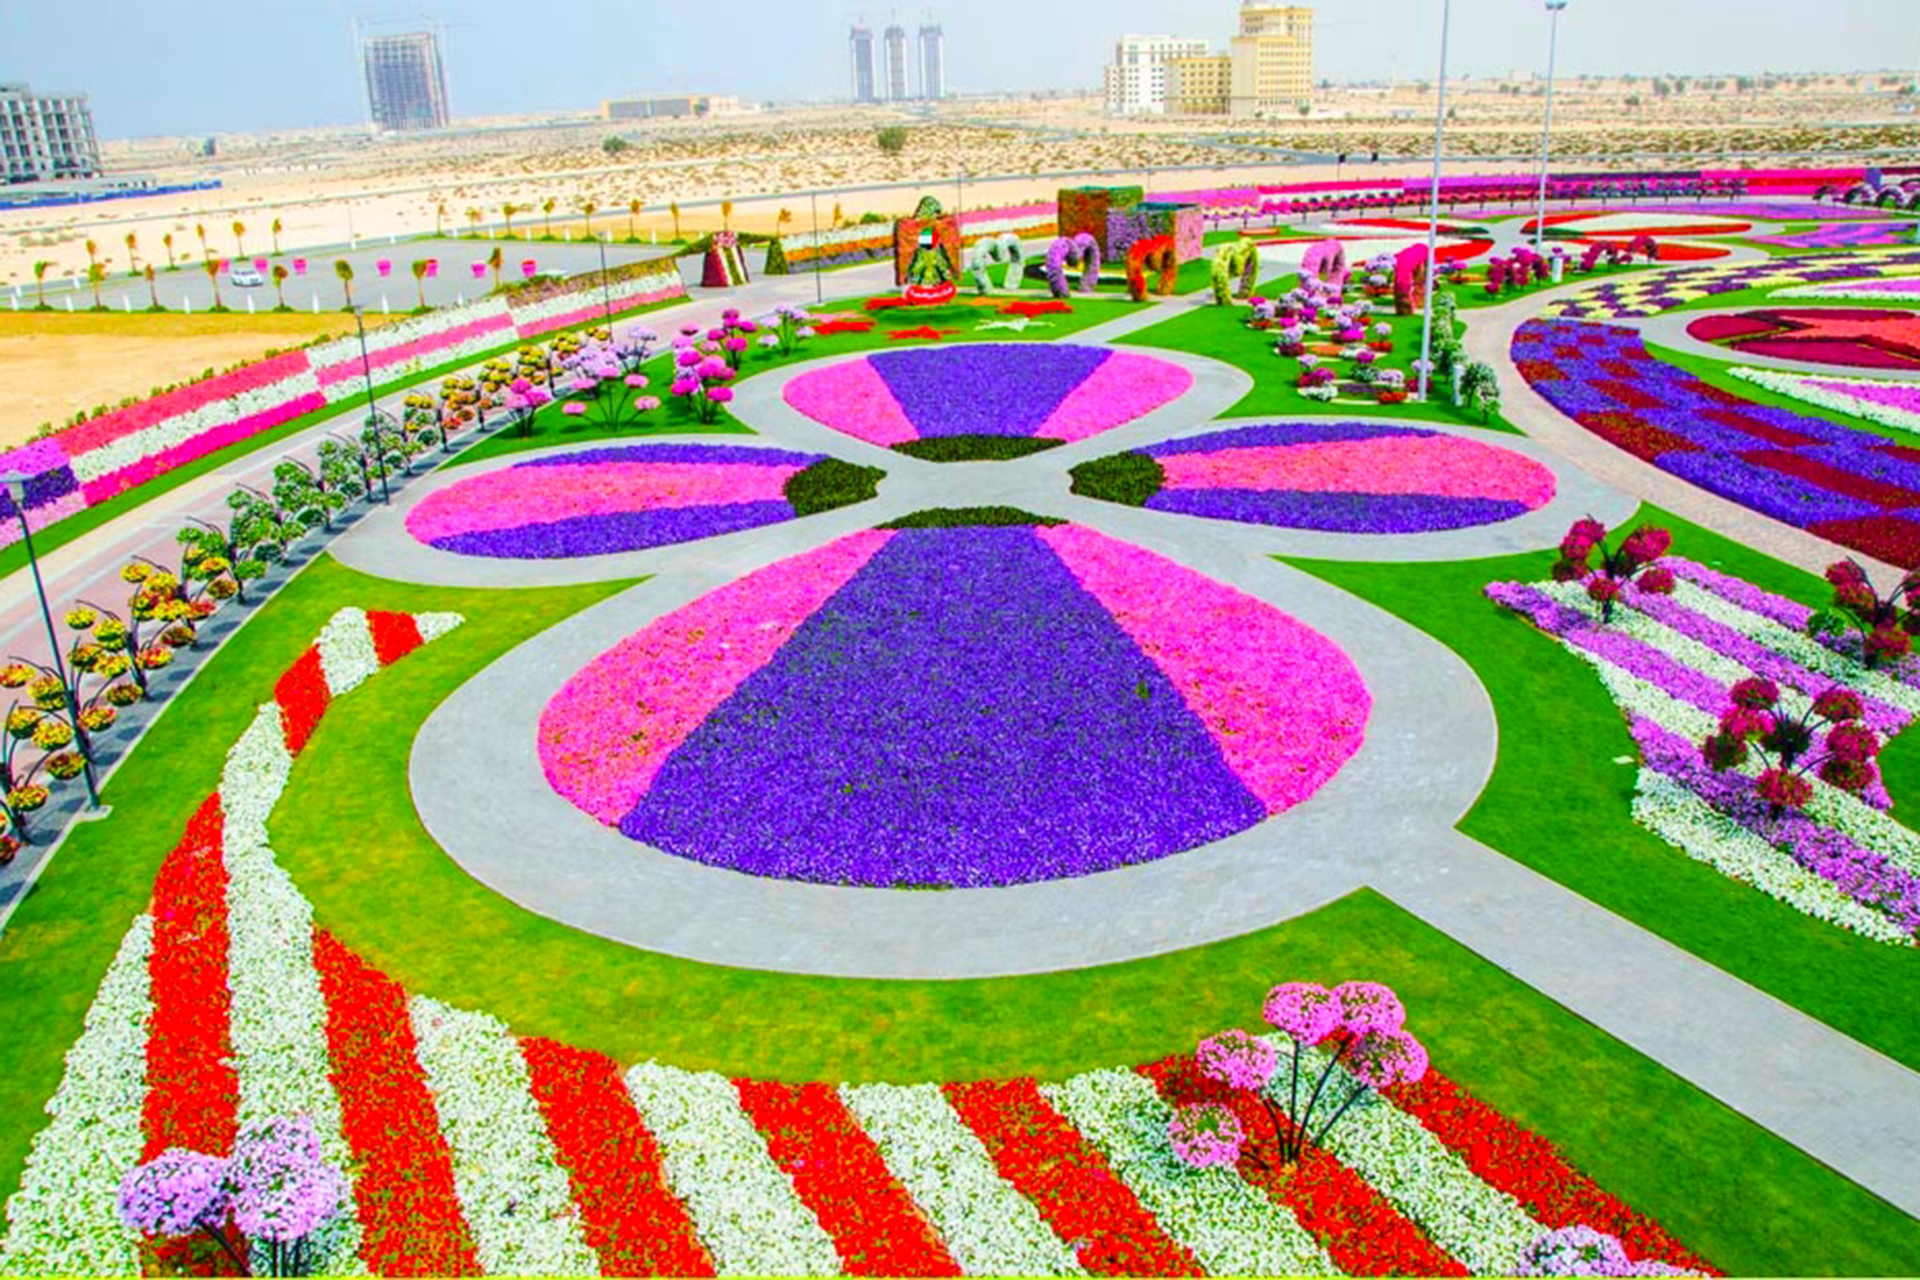 Dubai Miracle Garden Is Now Open For Its Seventh Season Attractions Time Out Dubai